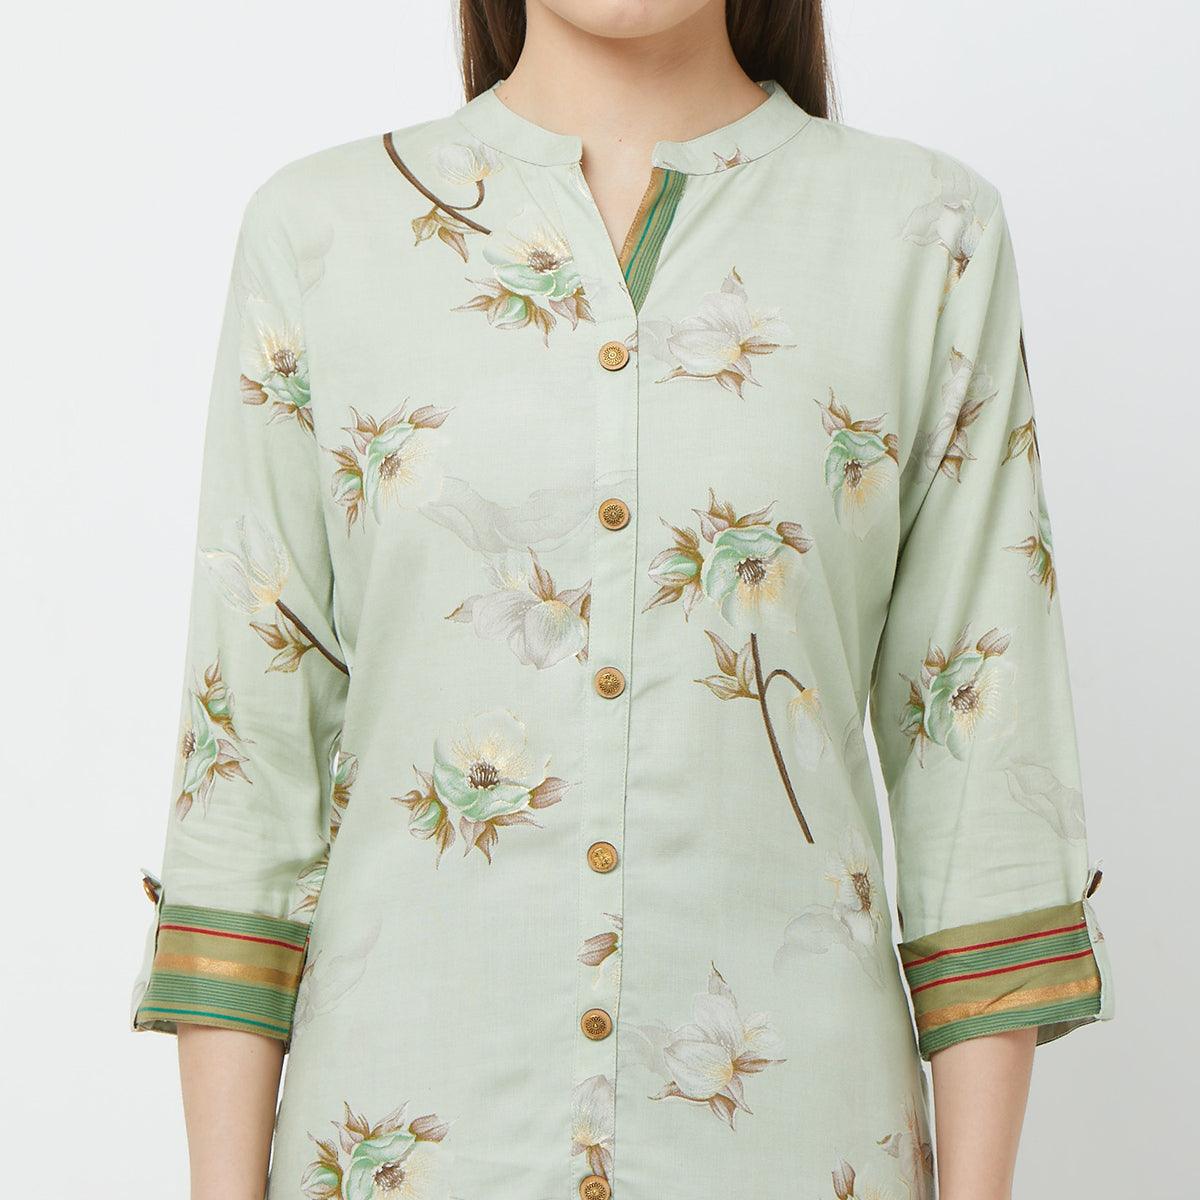 Intricate Mint Green Colored Casual Floral Printed Cotton Kurti-Palazzo Set - Peachmode